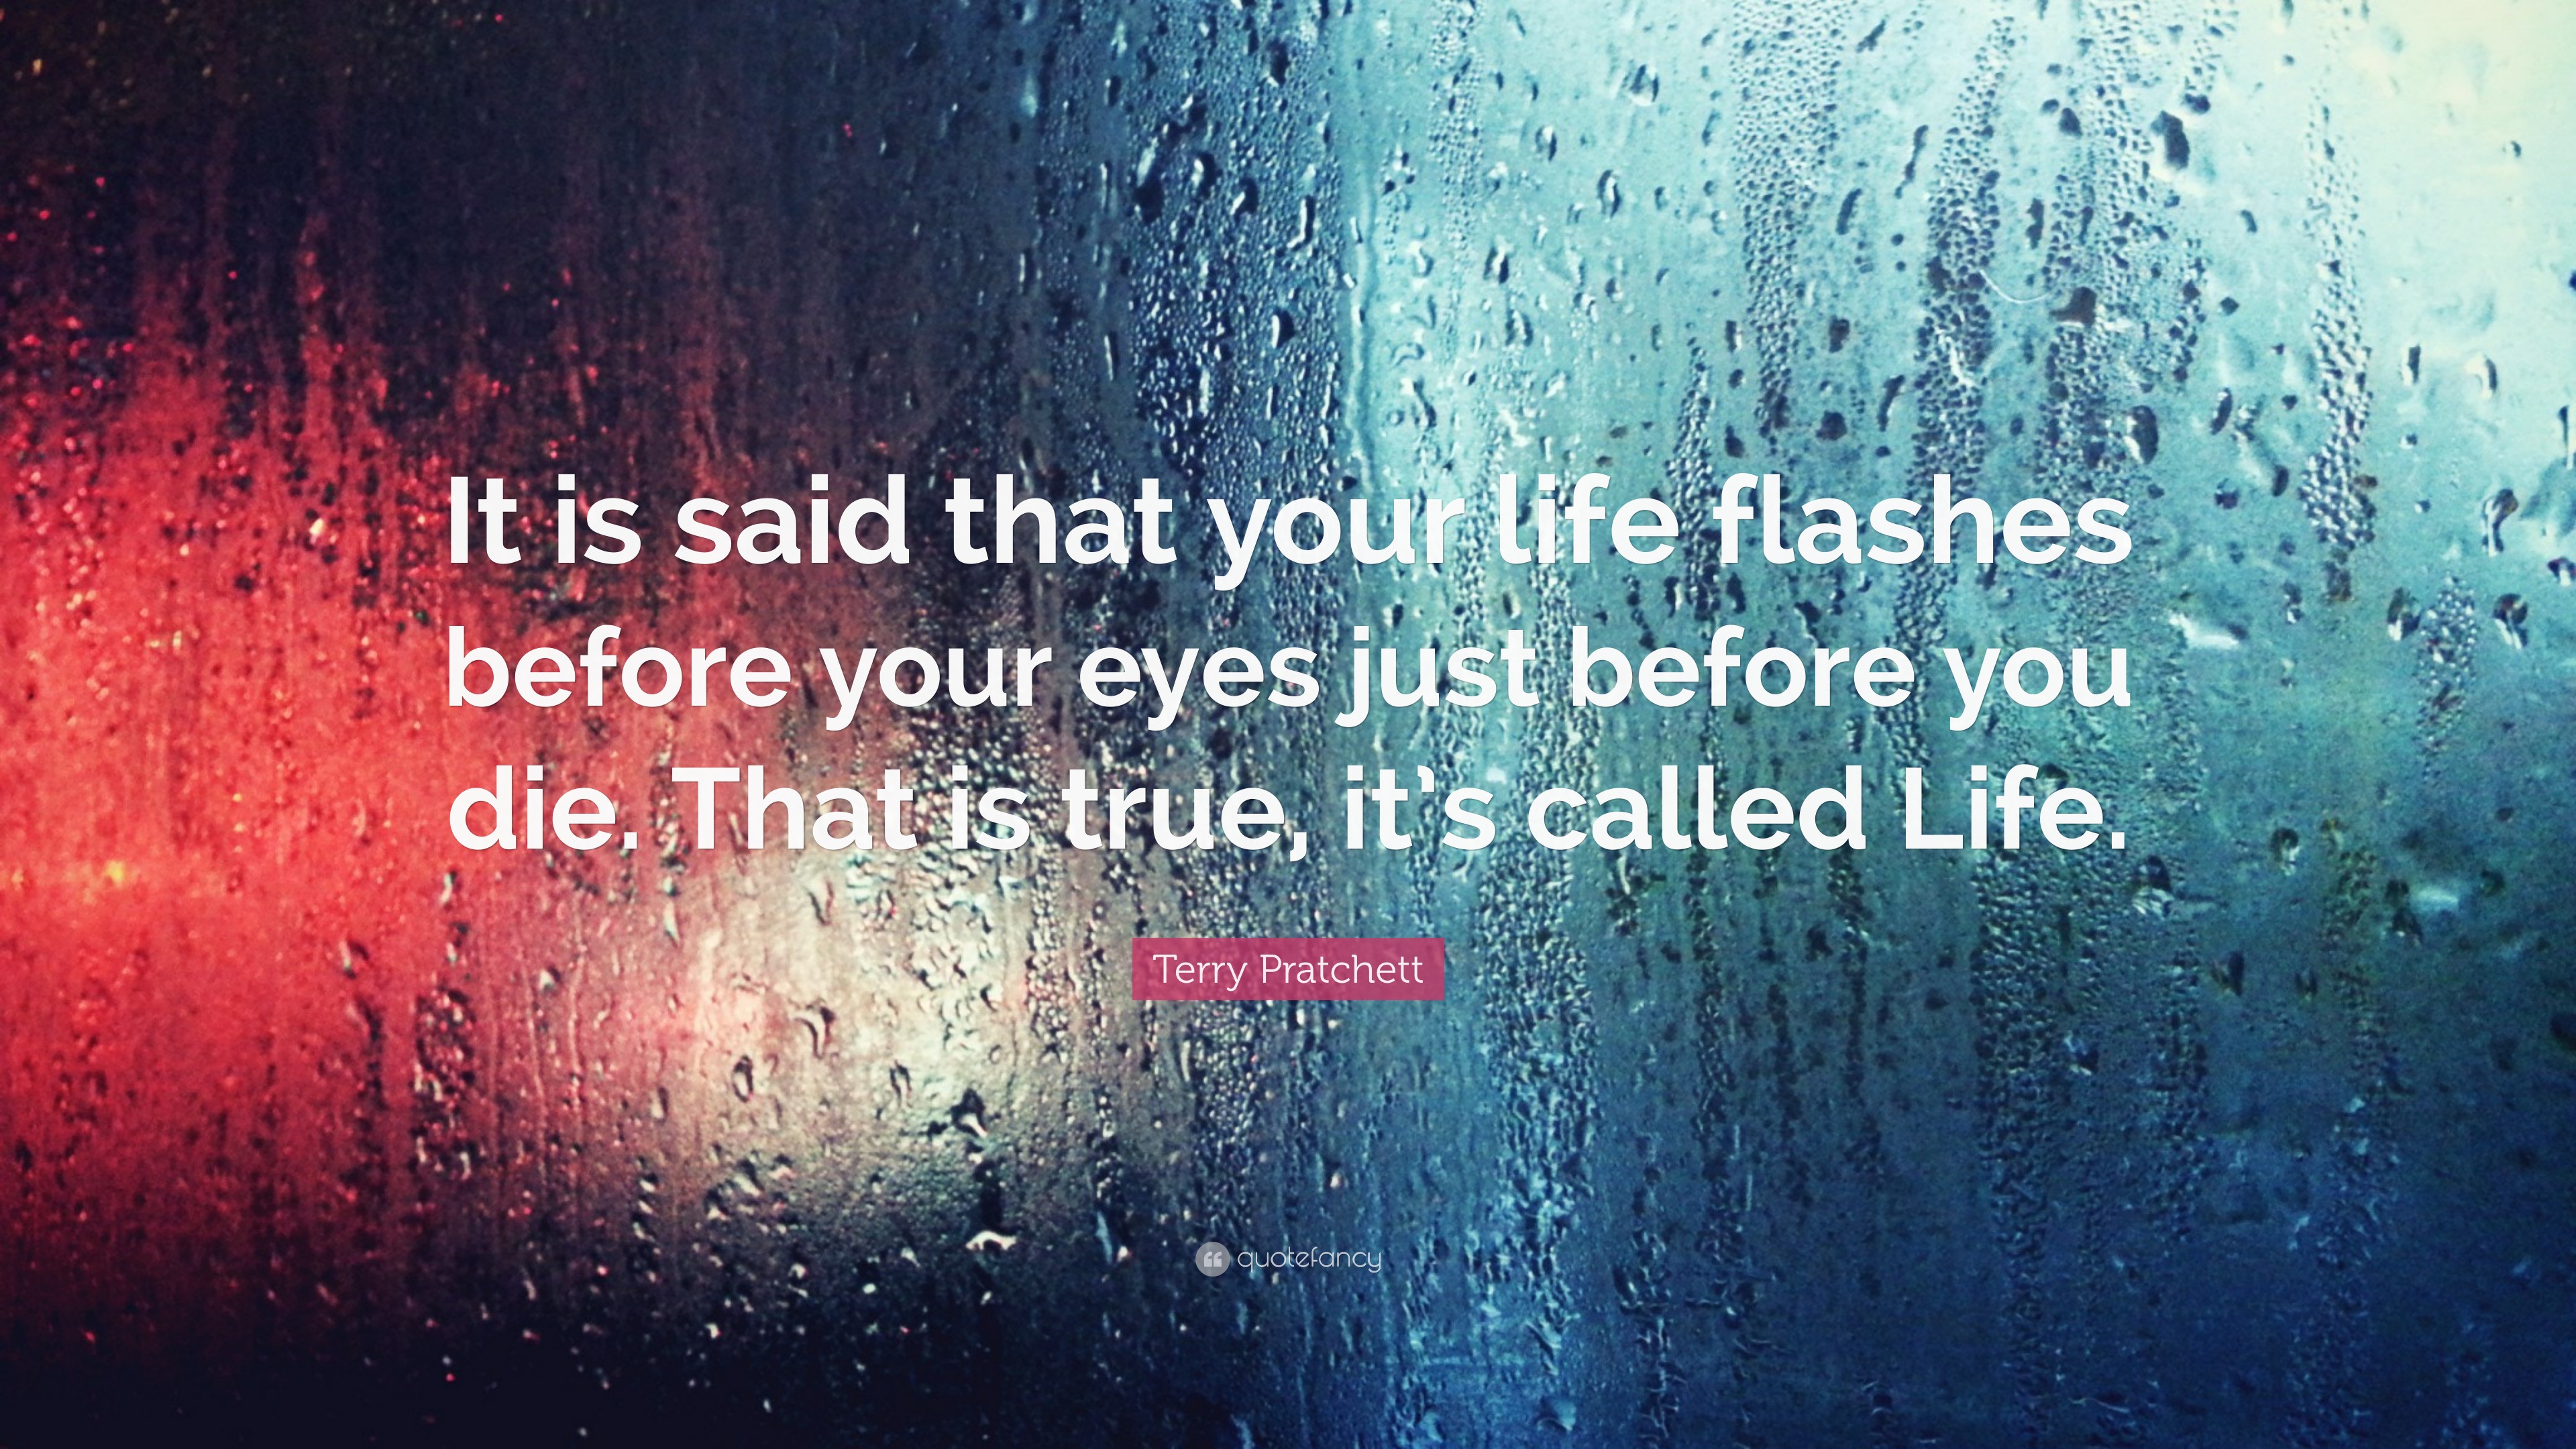 life may actually flash before your eyes on death